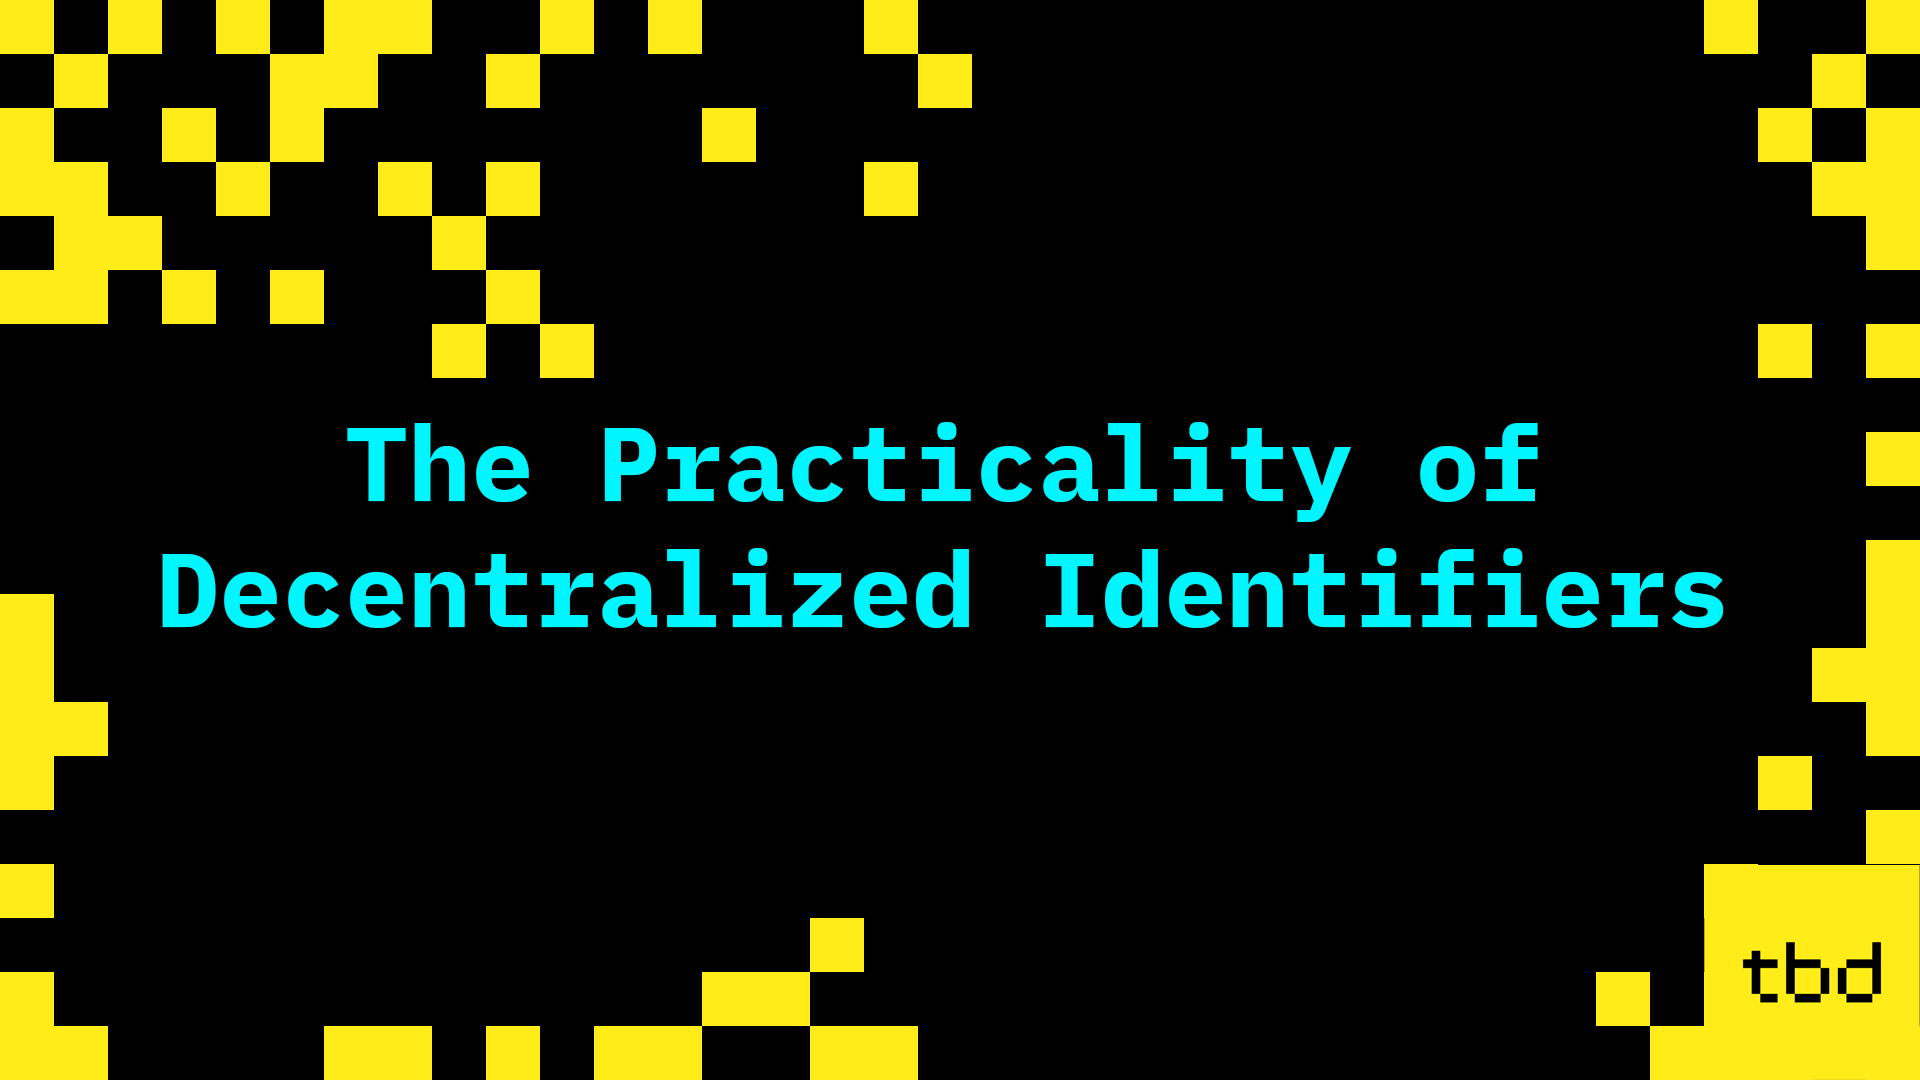 The Practicality of Decentralized Identifiers